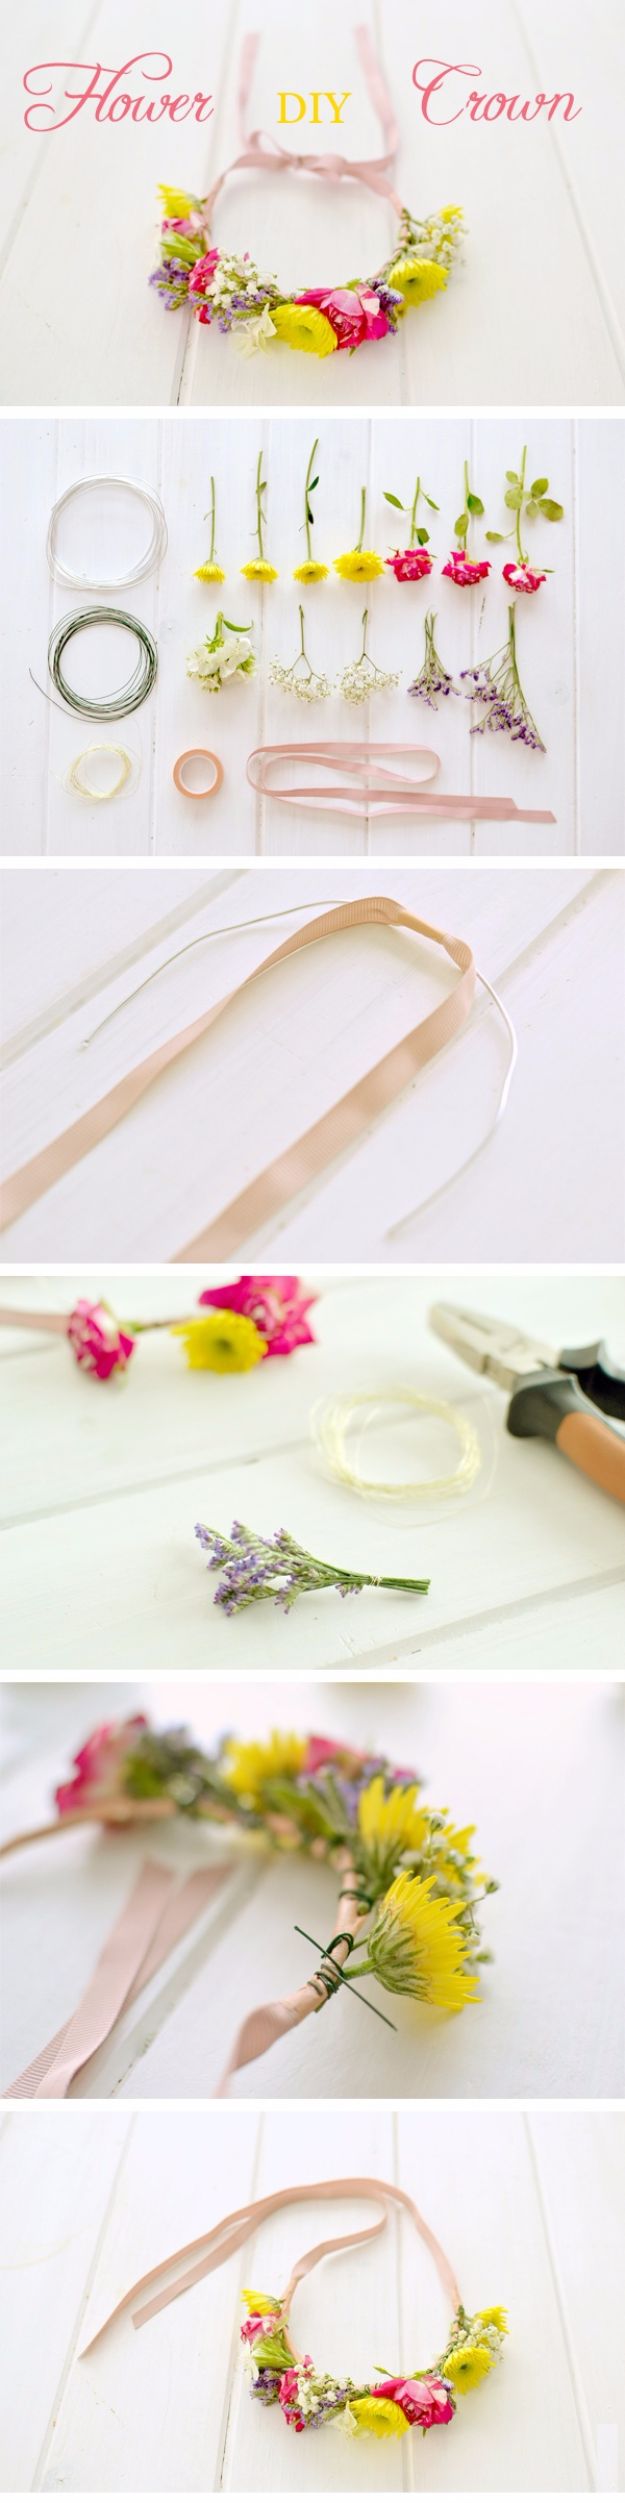 Cool Summer Fashions for Teens - Easy DIY Flower Crown - Easy Sewing Projects and No Sew Crafts for Fun Fashion for Teenagers - DIY Clothes, Shoes and Accessories for Summertime Looks - Cheap and Creative Ways to Dress on A Budget 